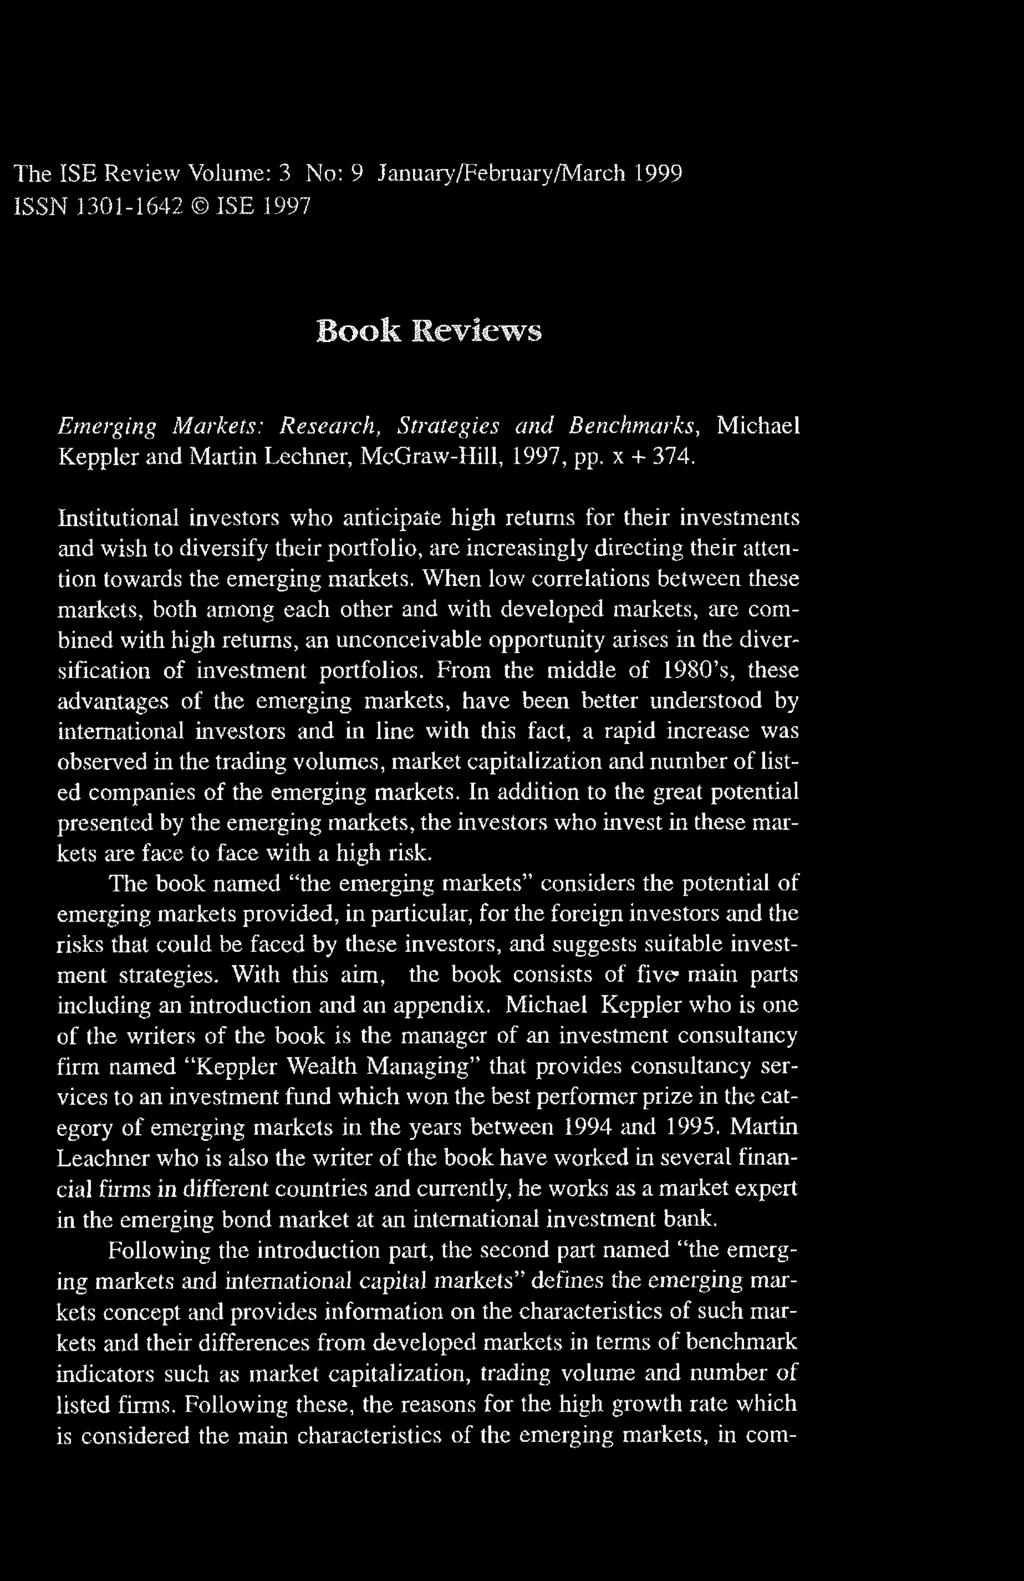 The ISE Review Volume: 3 No: 9 January/February/March 999 ISSN 30-642 IS E 997 Book Reviews Emerging Markets: Research, Sfrategies and Benchmarks, Michael Keppler and Martin Lechner, McGraw-Hill,